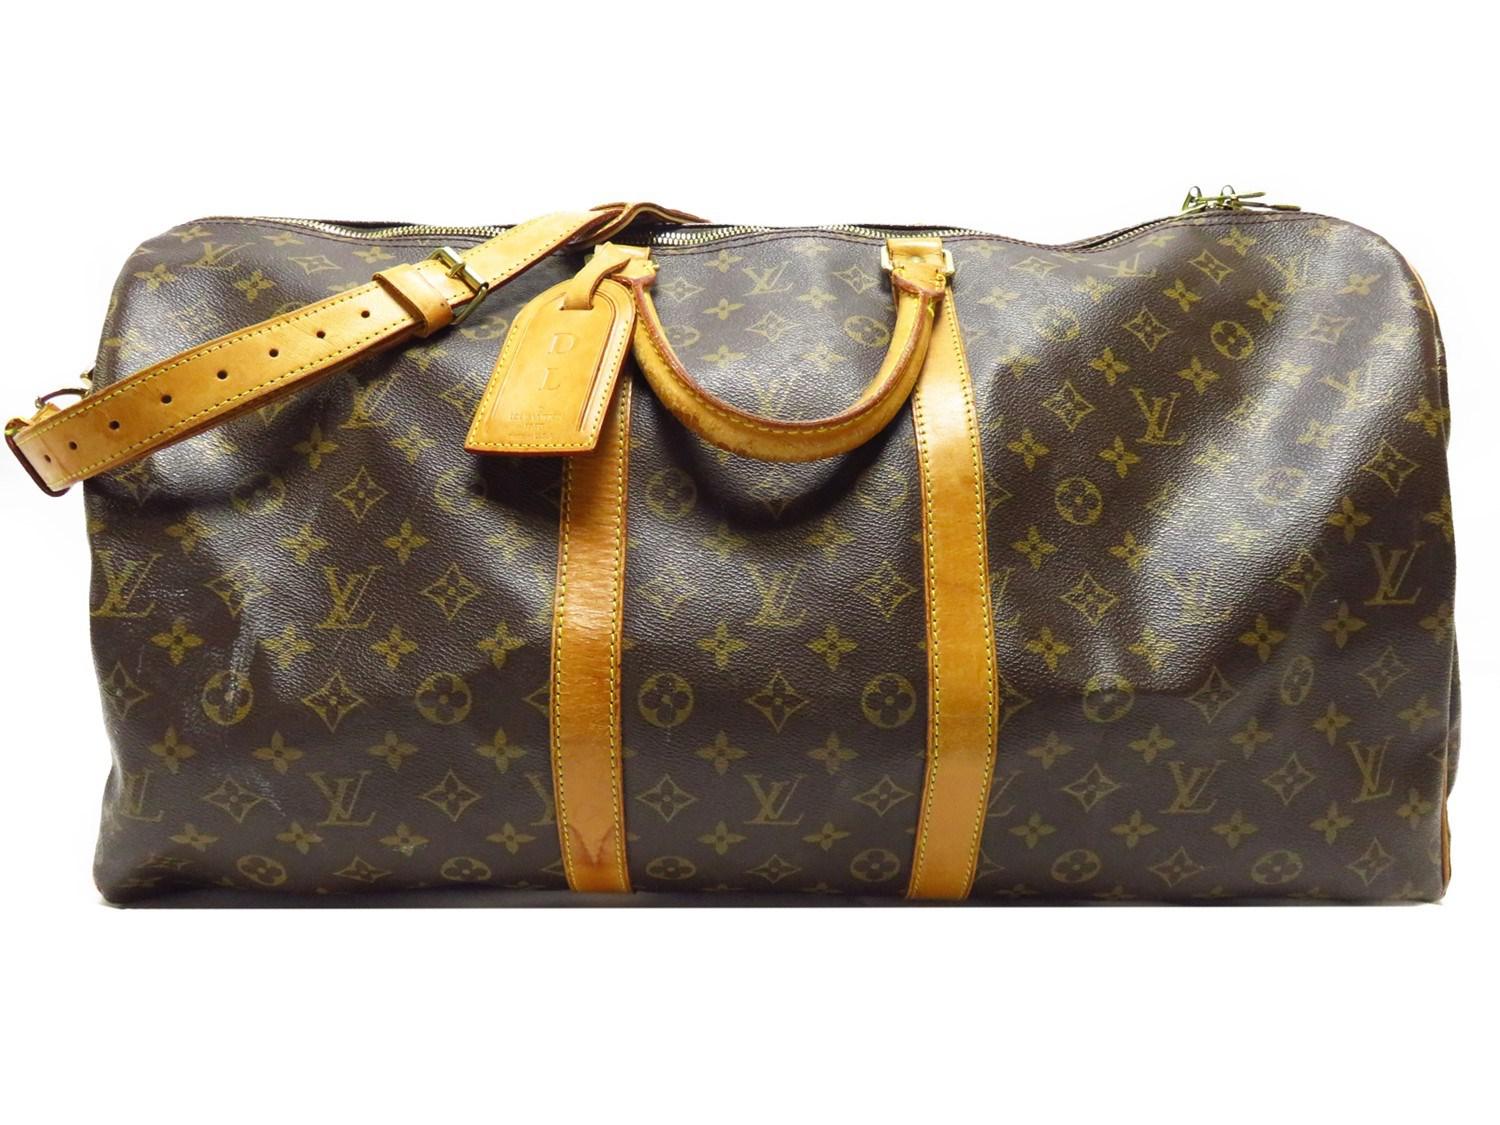 Louis Vuitton Monogram Keepall Bandoliere 55 Carry-on Travel Bag M41414 in Brown for Men - Lyst